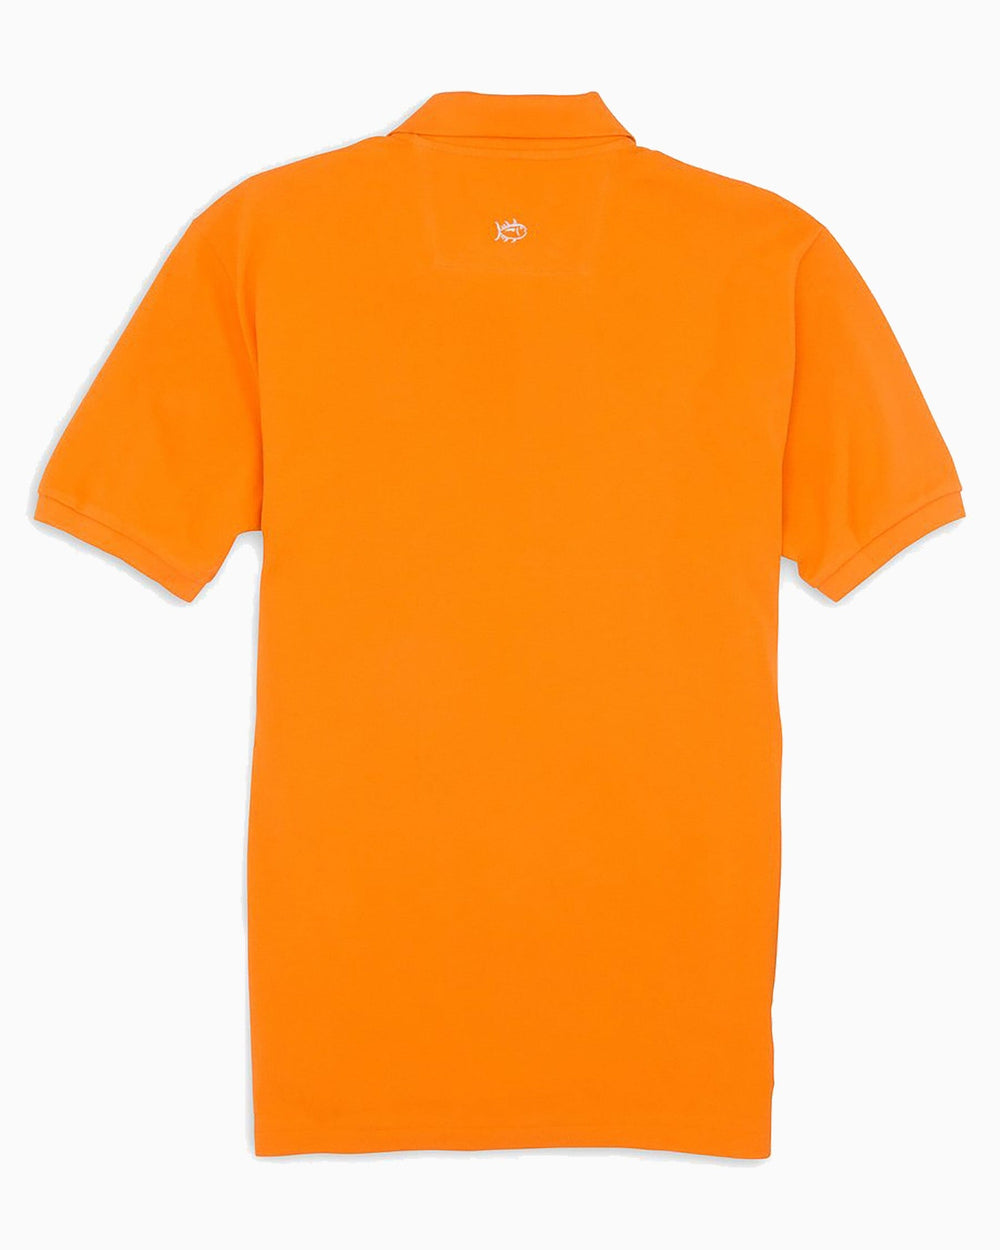 The back view of the Men's Orange Skipjack Gameday Colors Polo Shirt by Southern Tide - Rocky Top Orange